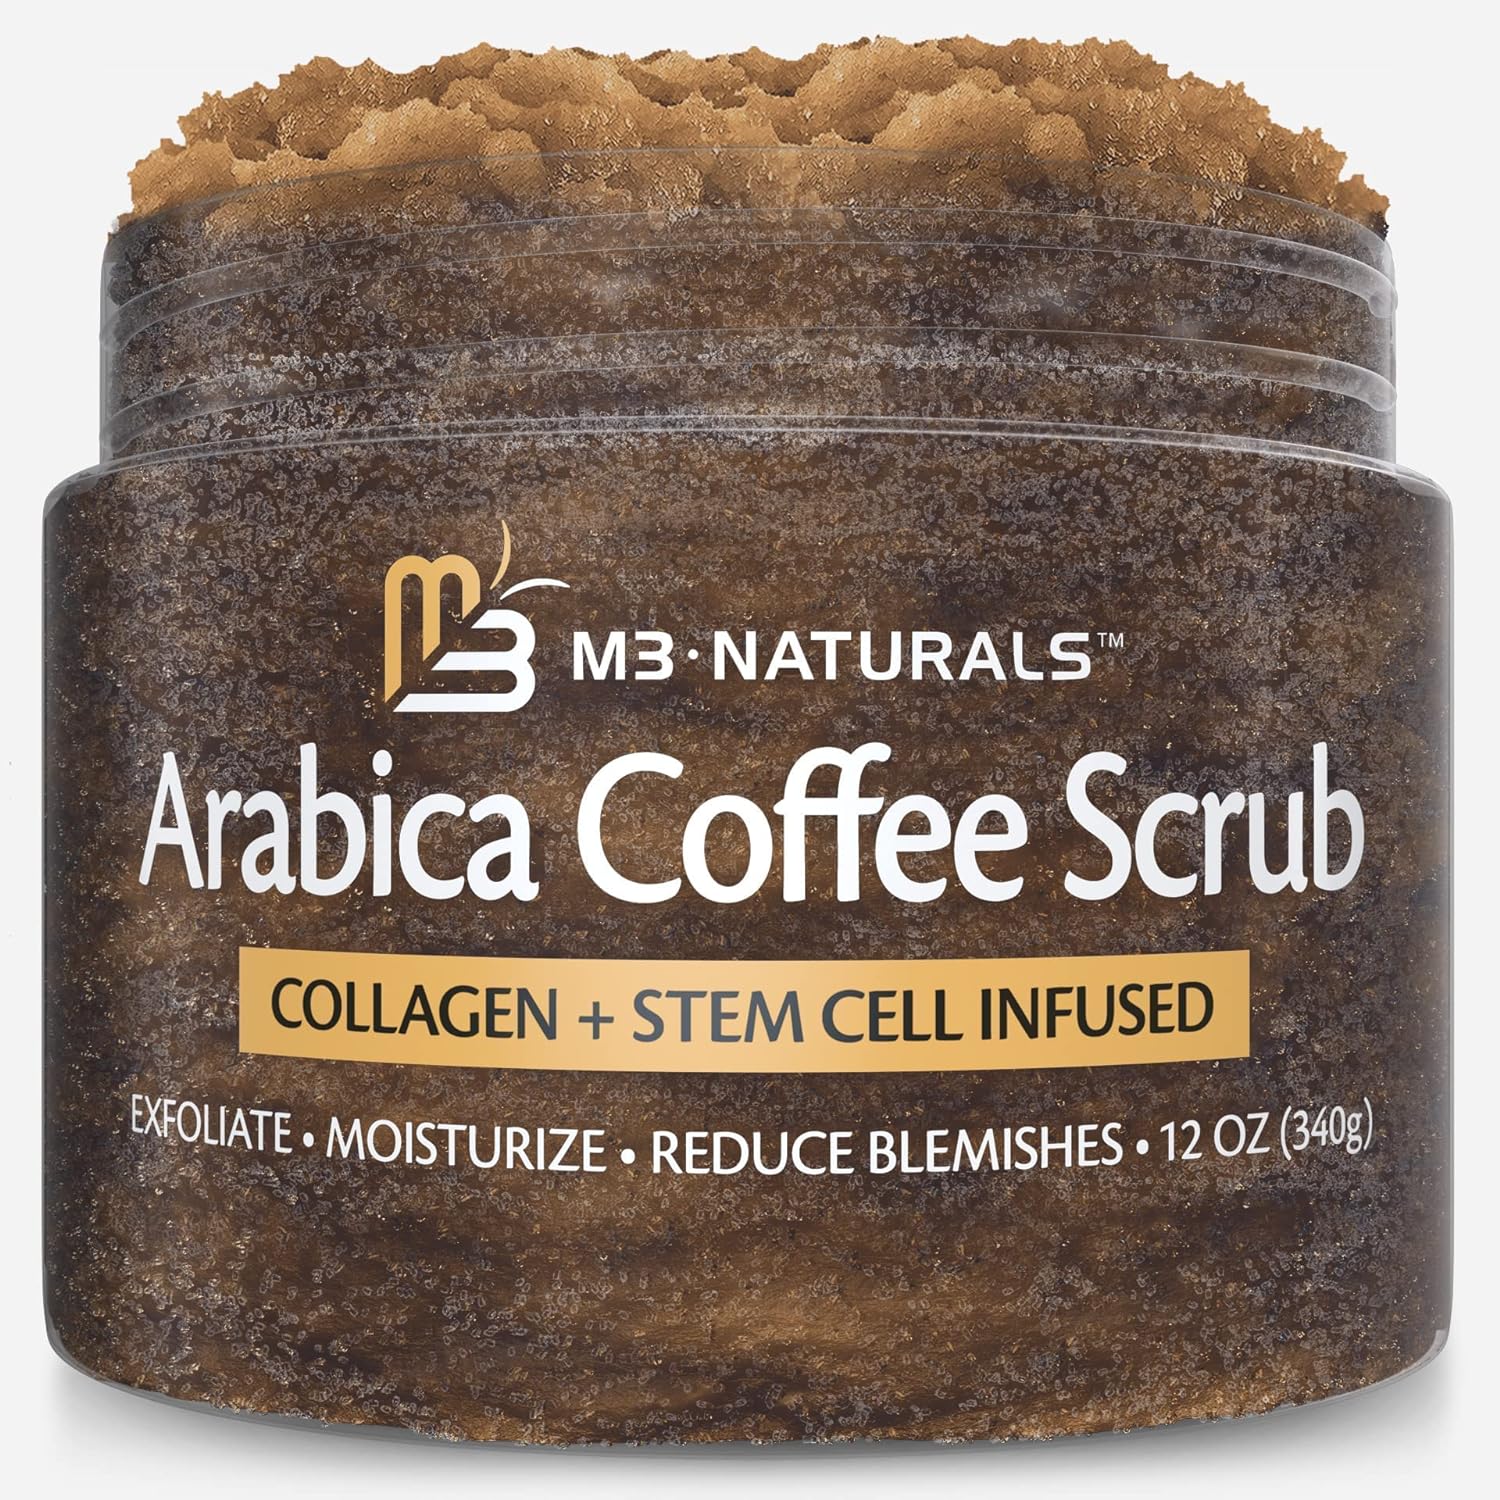 Buy M3 Naturals Anti Cellulite Massage Oil + Arabica Coffee Body Scrub on Amazon.com ? FREE SHIPPING on qualified orders